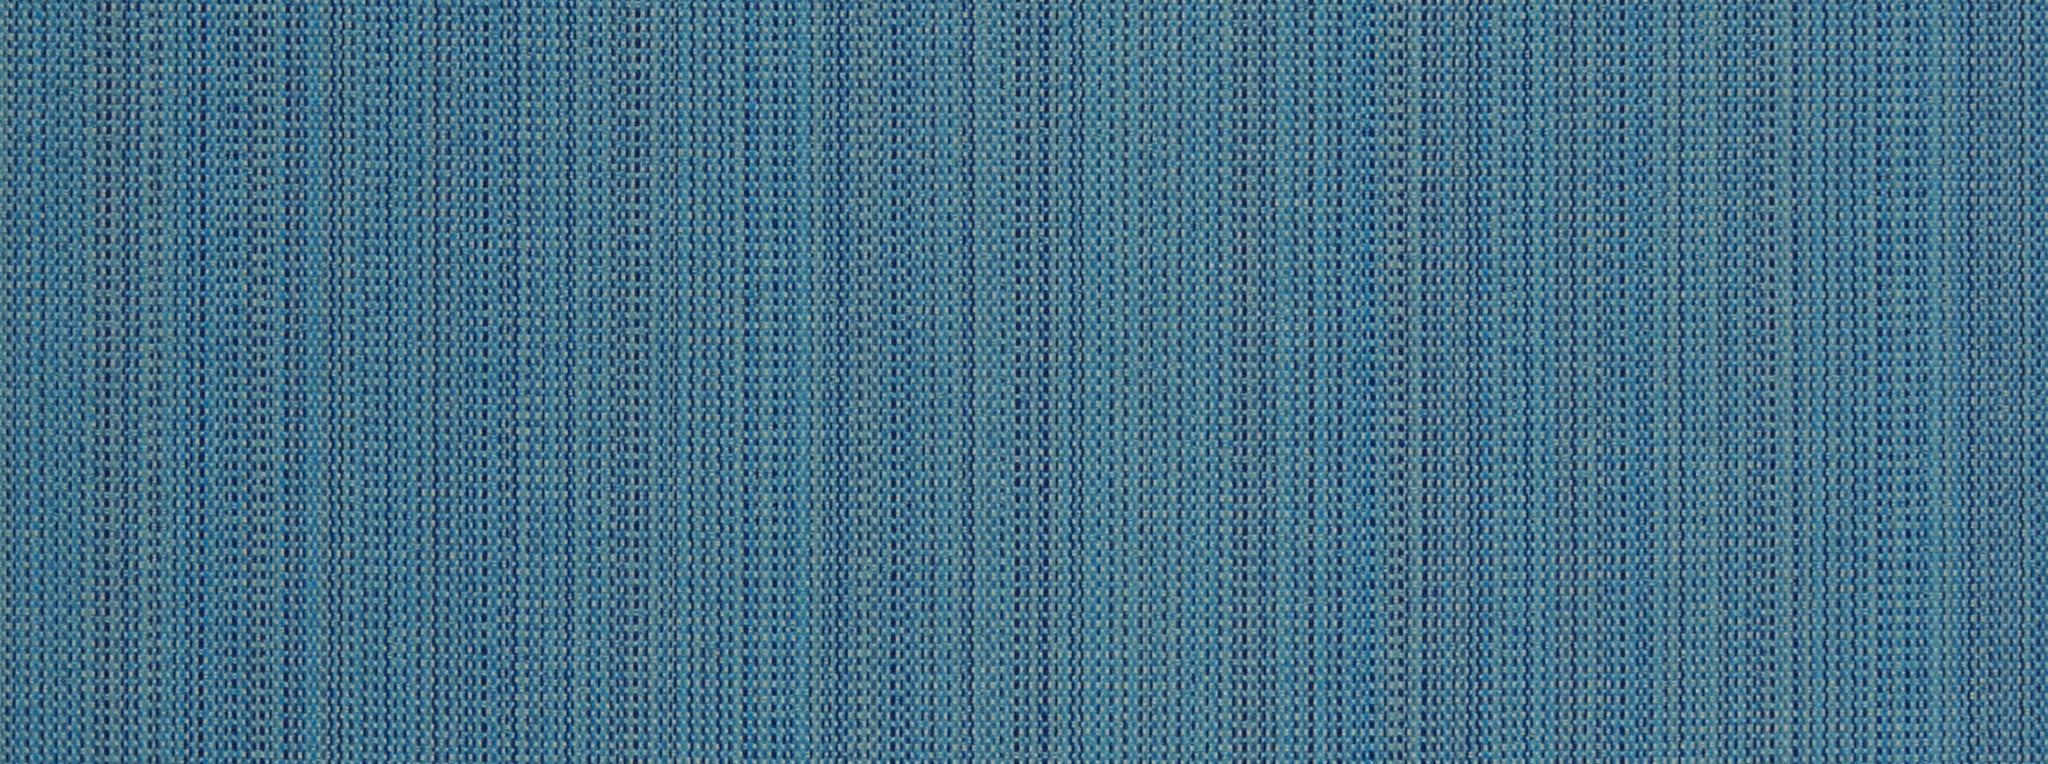 TUCKER BLUE MADE TO MEASURE COTTON BLEND DRAPES